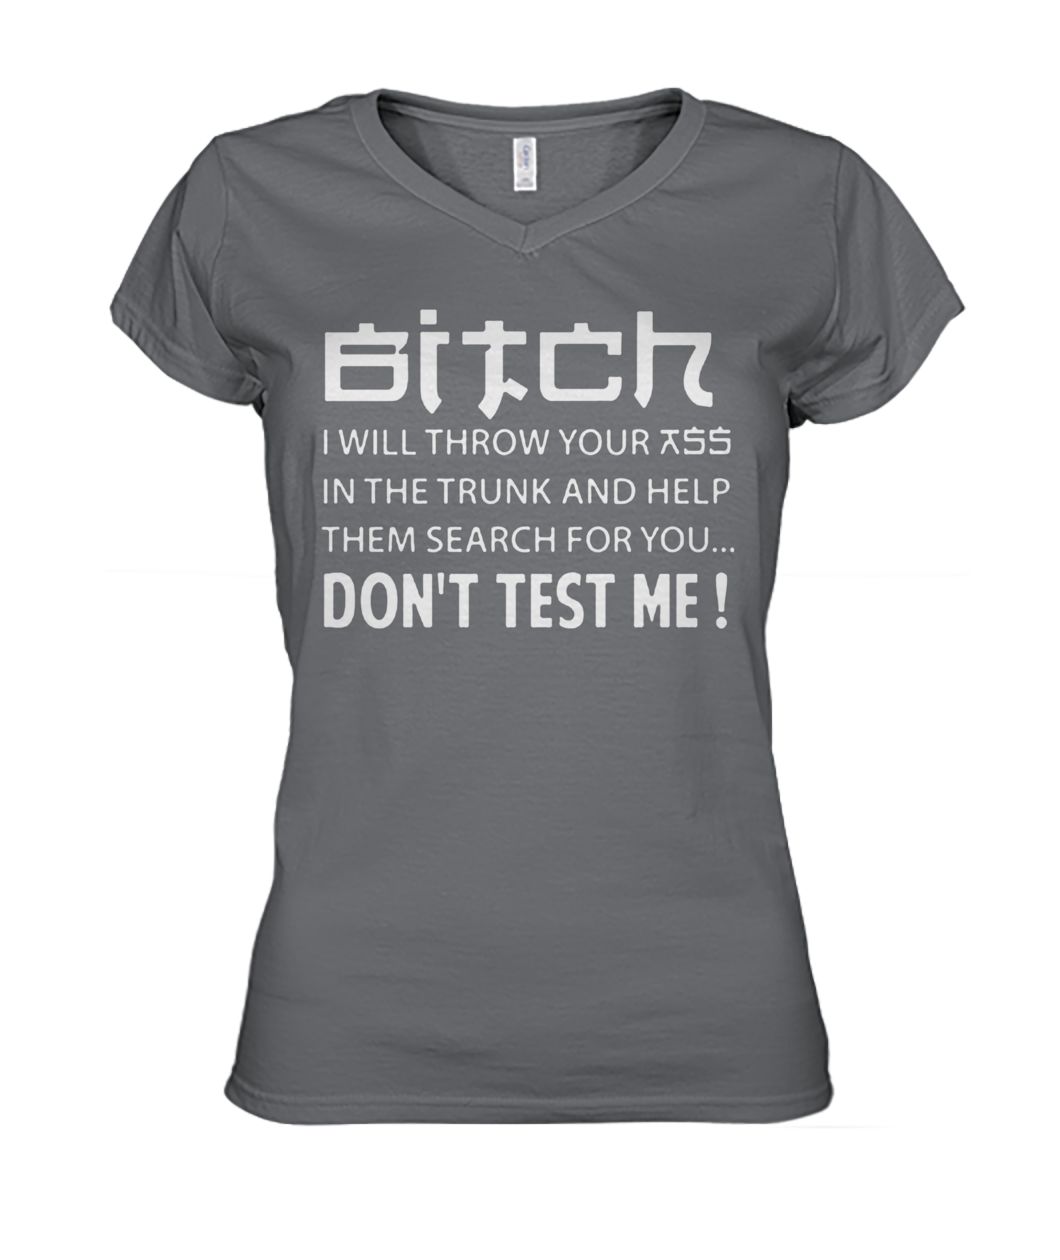 Bitch I will throw your ass in the trunk and help them search for you don't test me women's v-neck